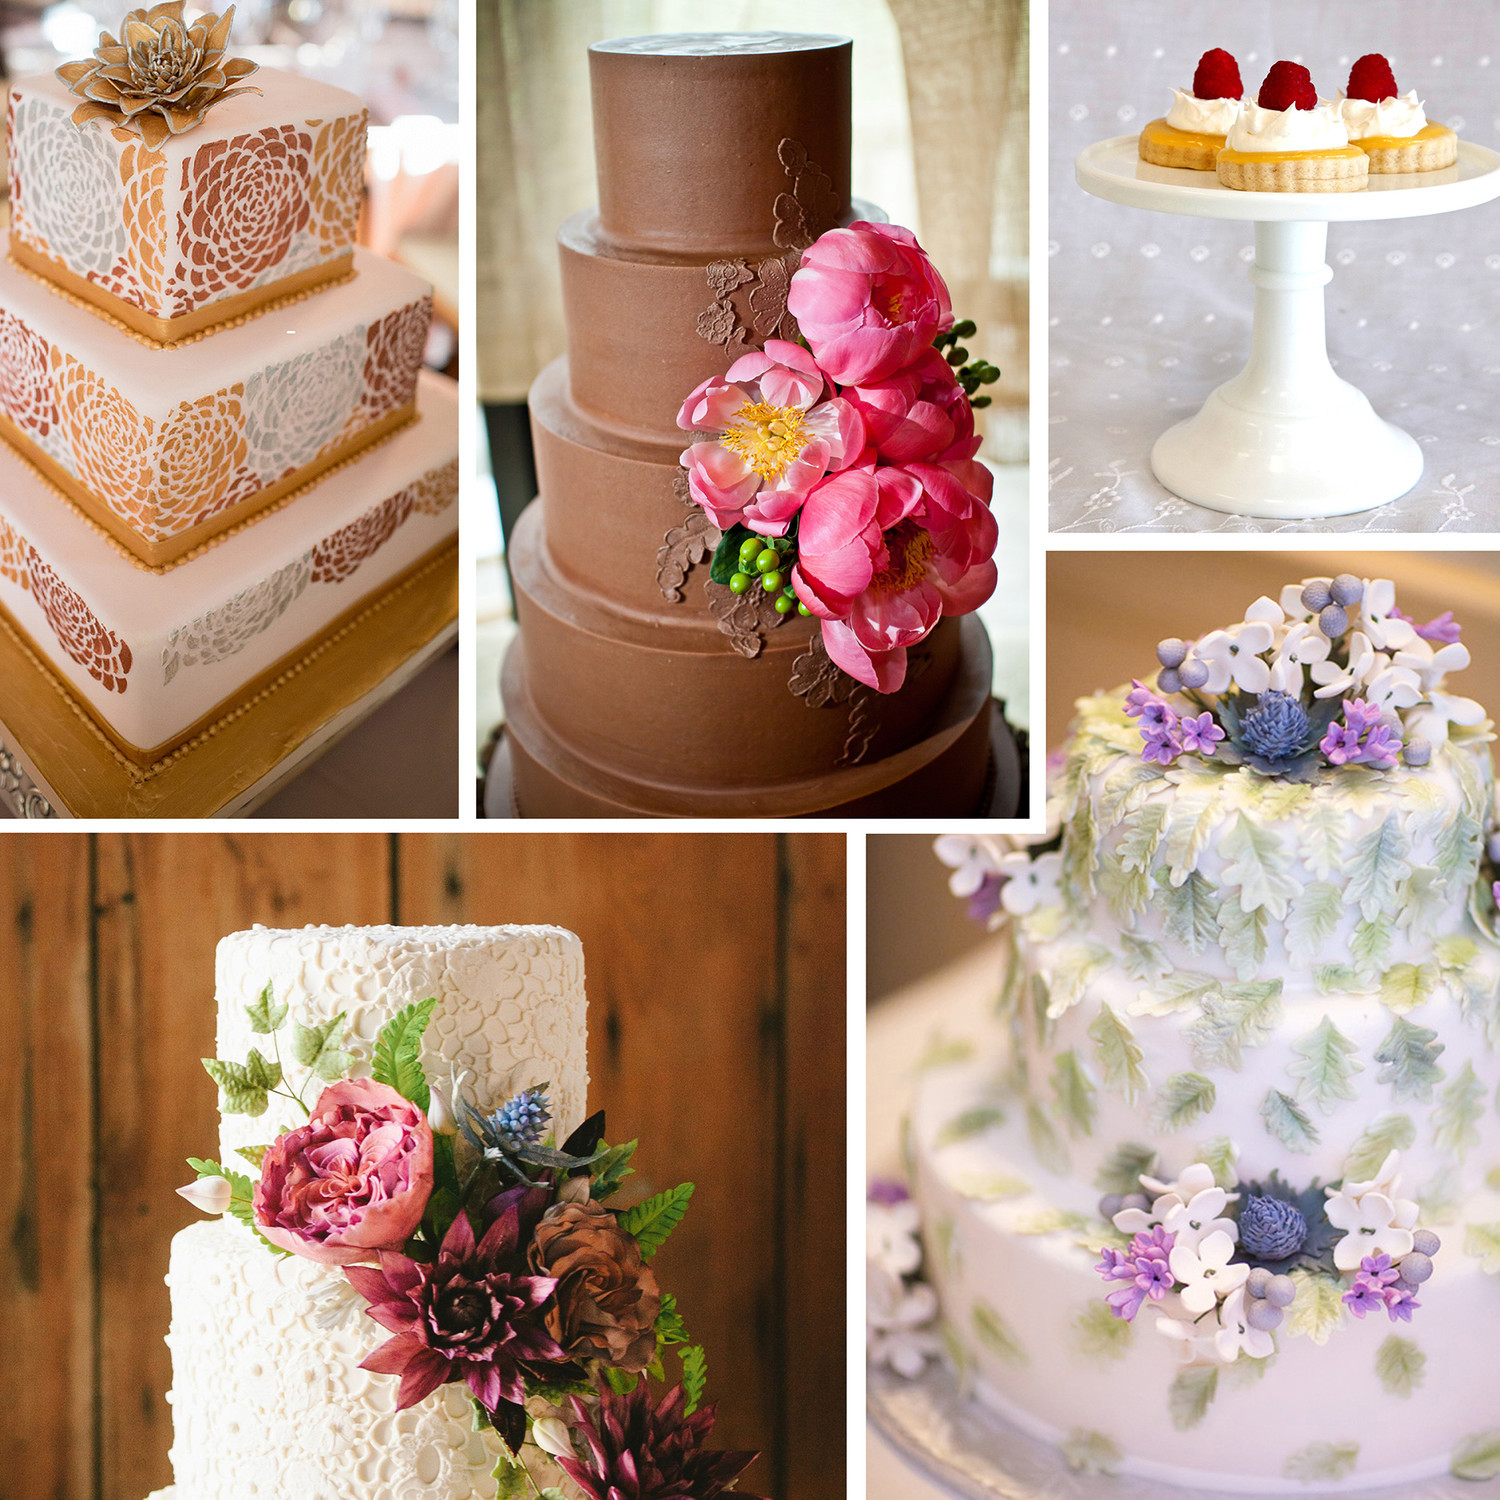 Martha Stewart Wedding Cake
 A Sweet Guide to Choosing a Frosting for Your Wedding Cake